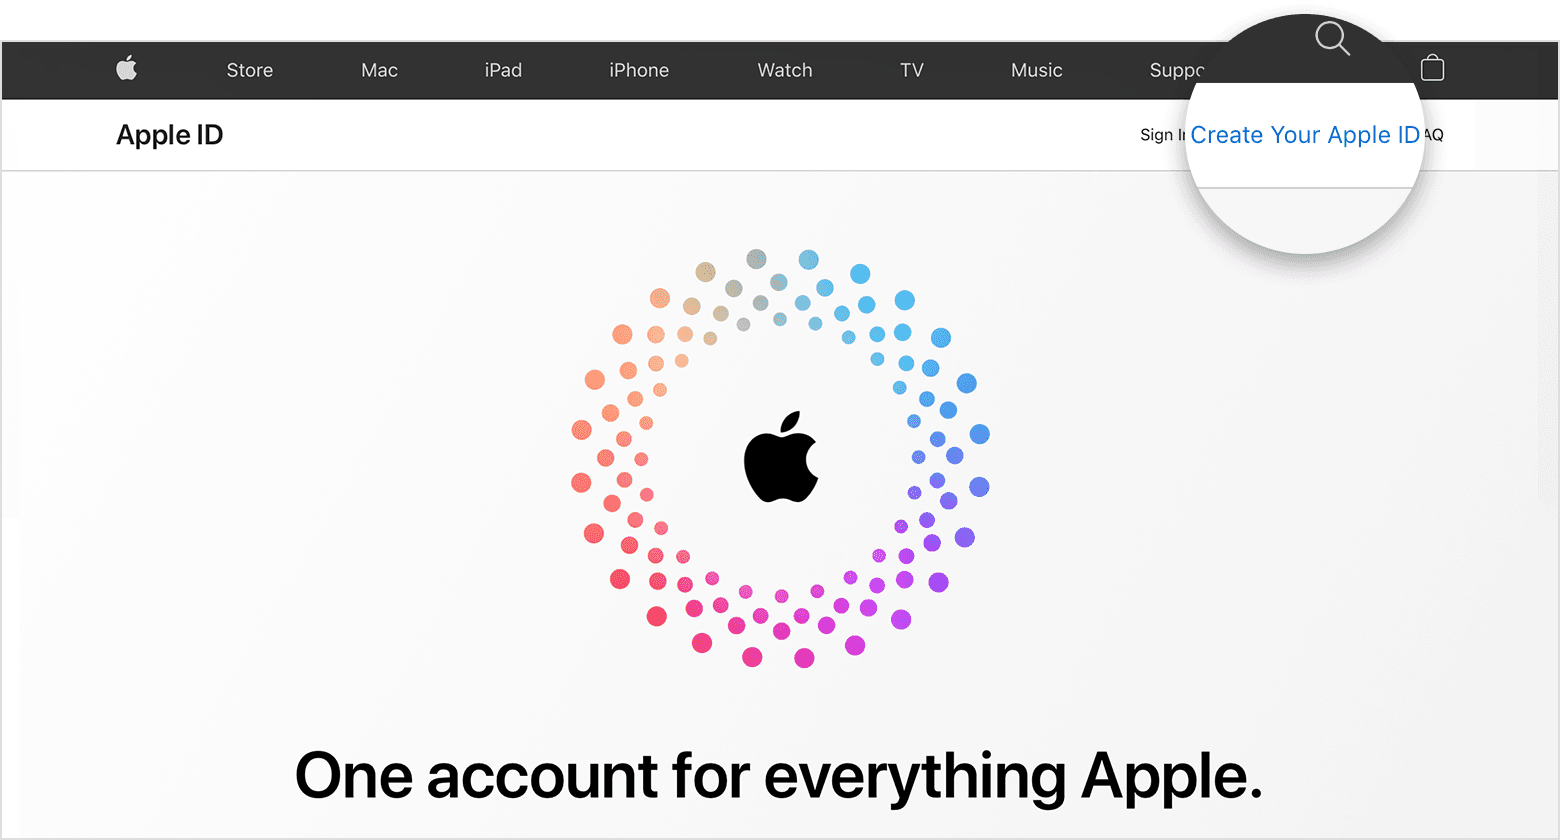 Cannot log into itunes account on pc